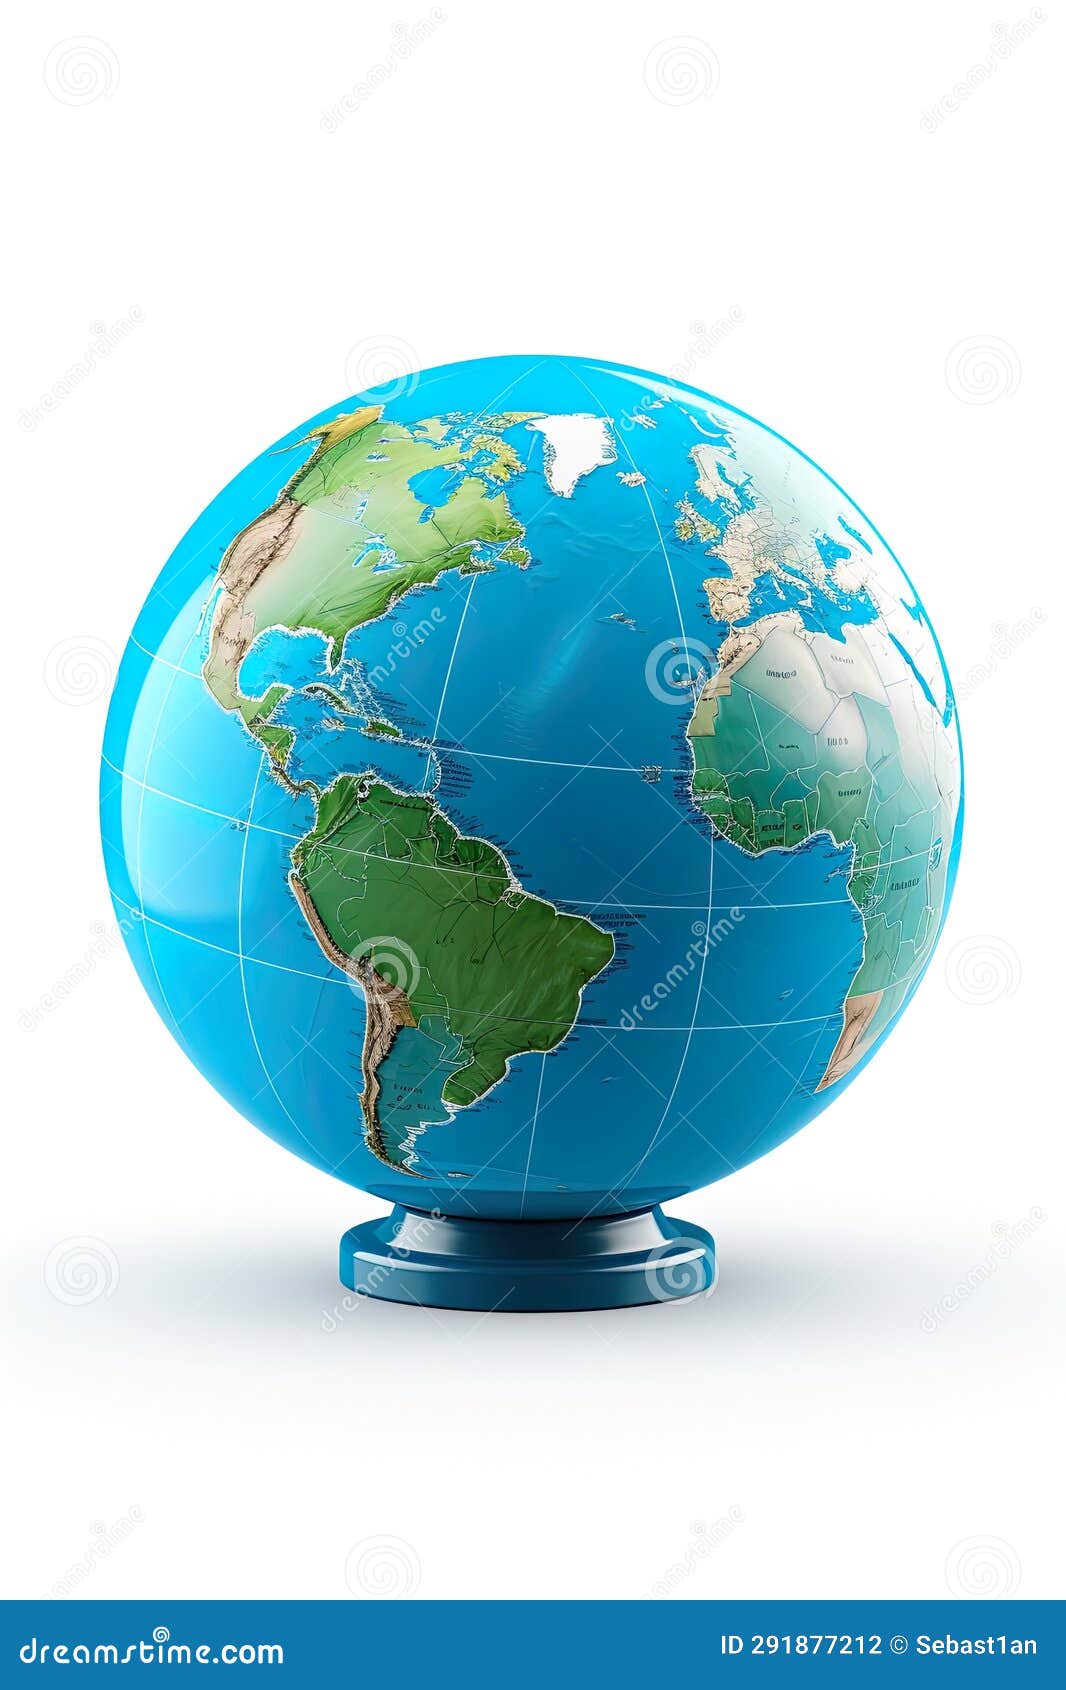 world globe, an invaluable educational item that brings the earth to life.